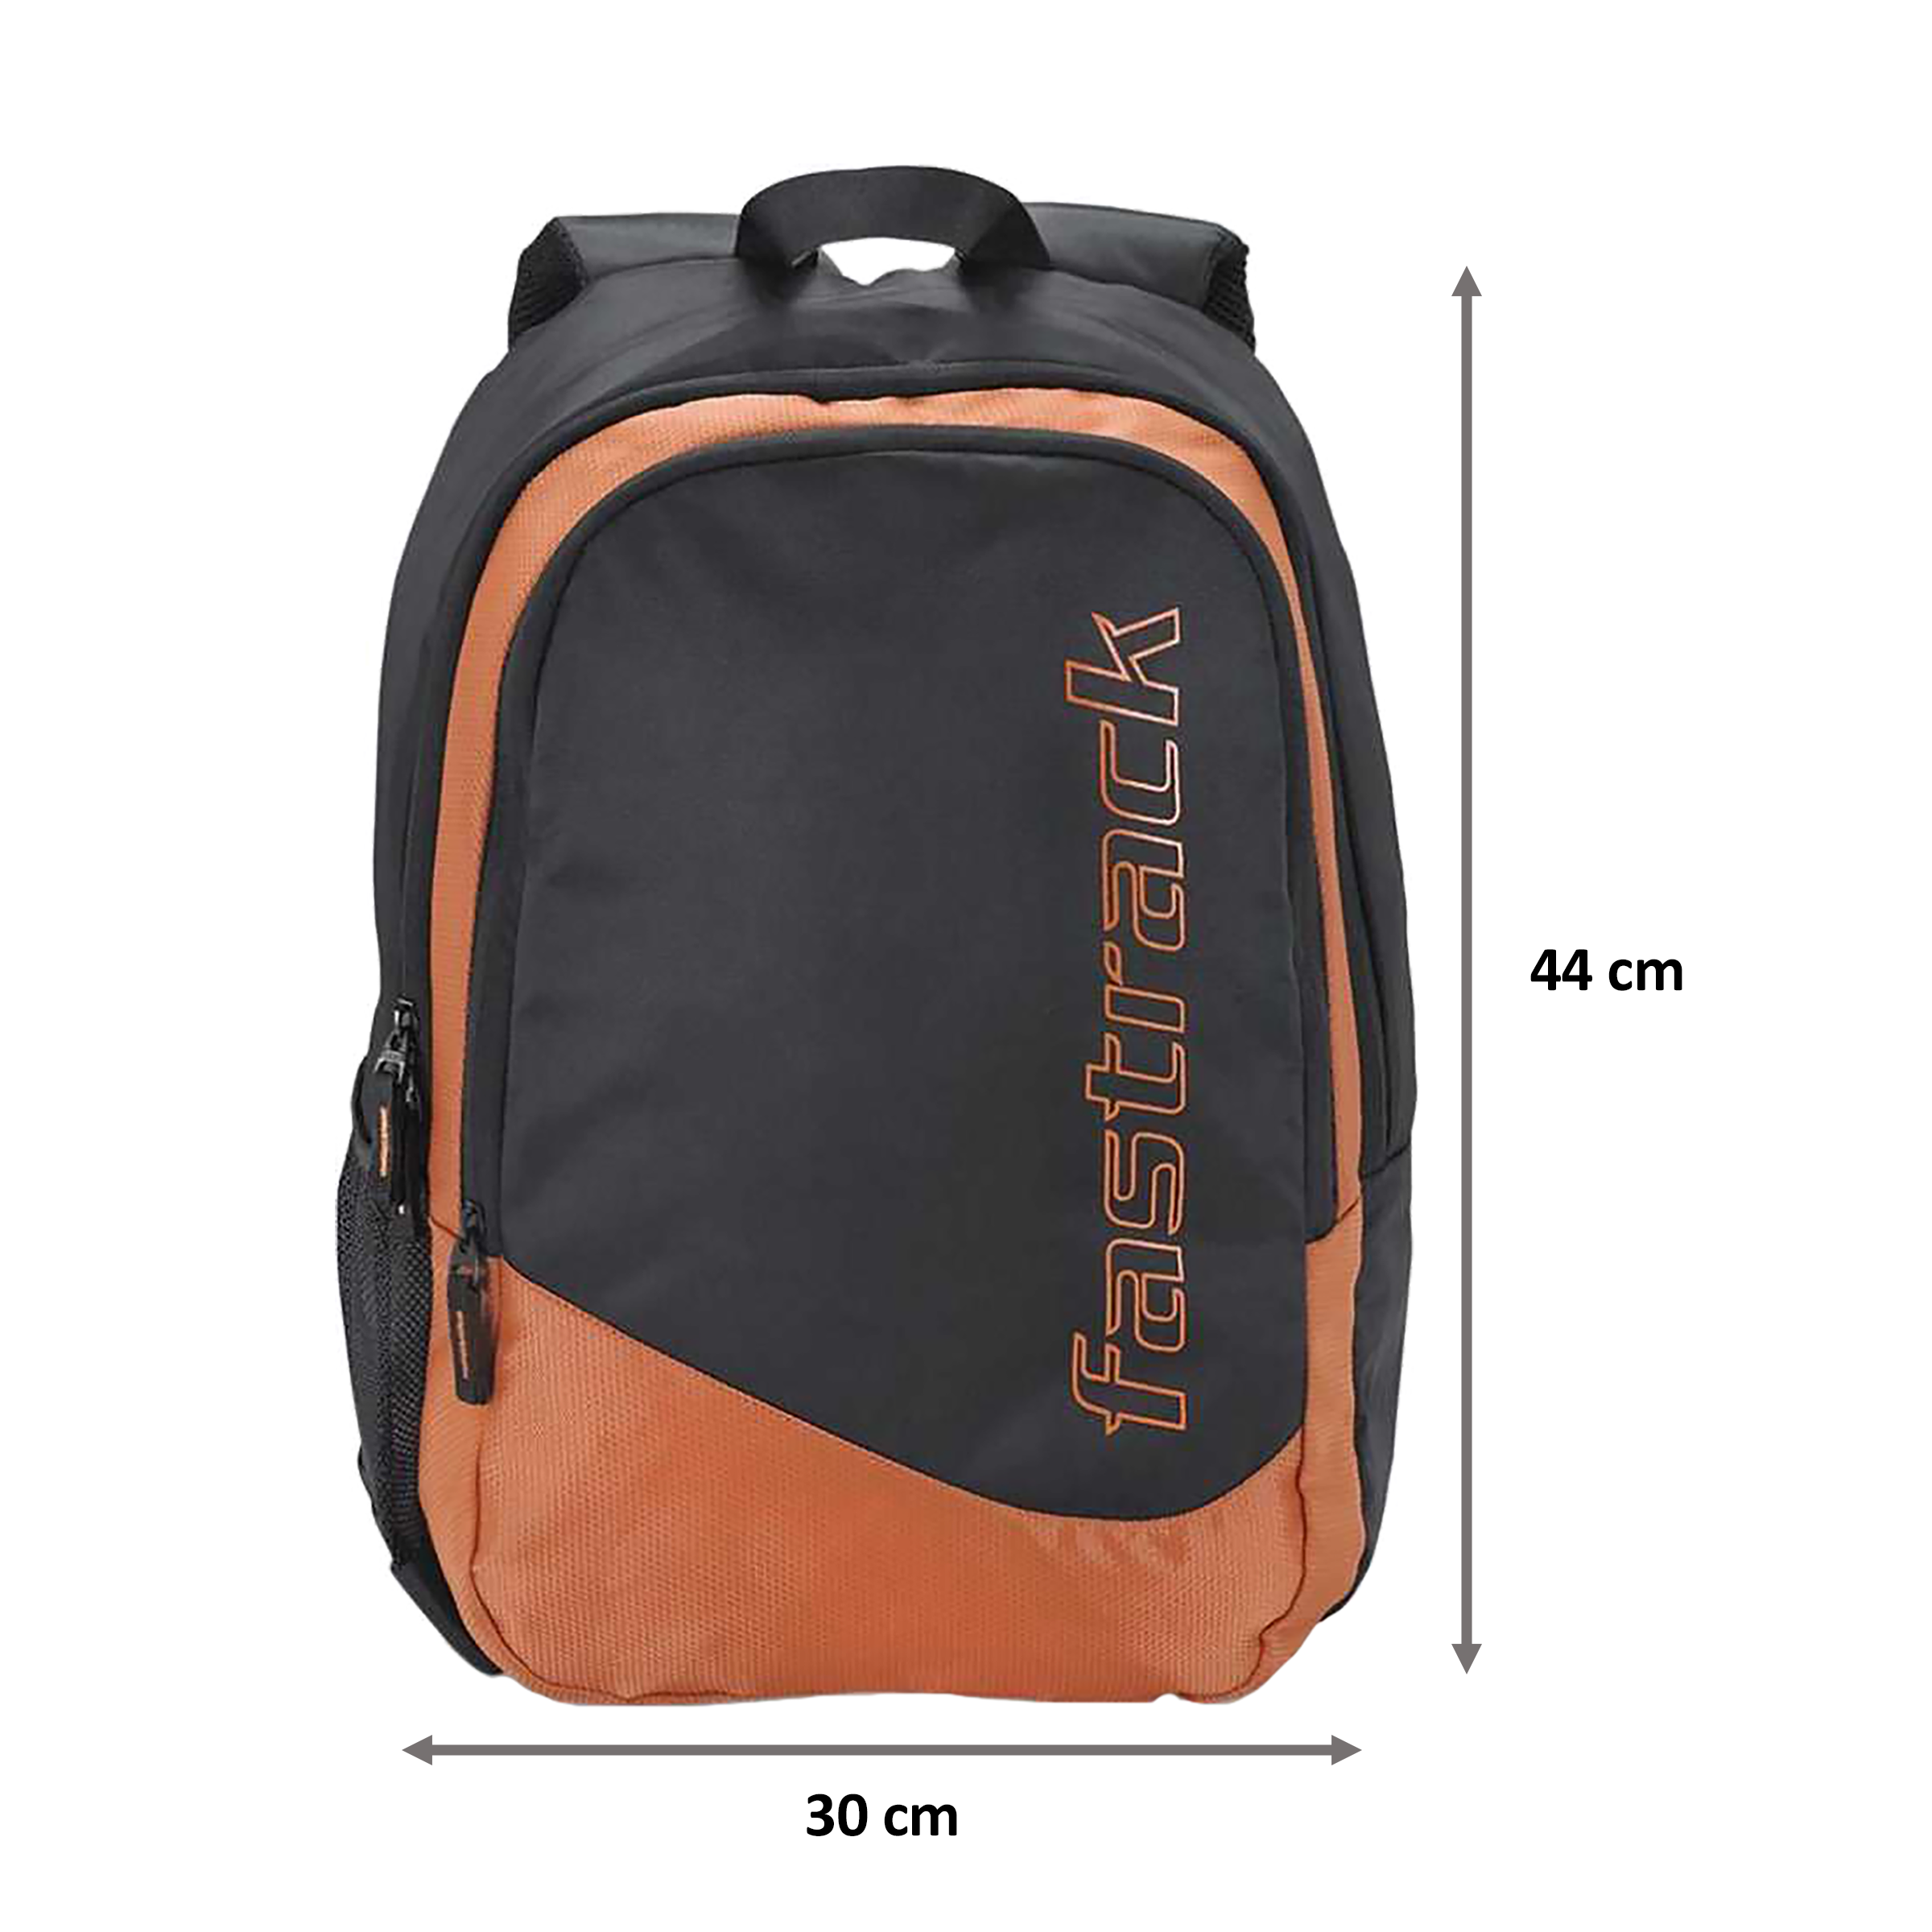 Fastrack Bags Bag - Buy Fastrack Bags Bag online in India